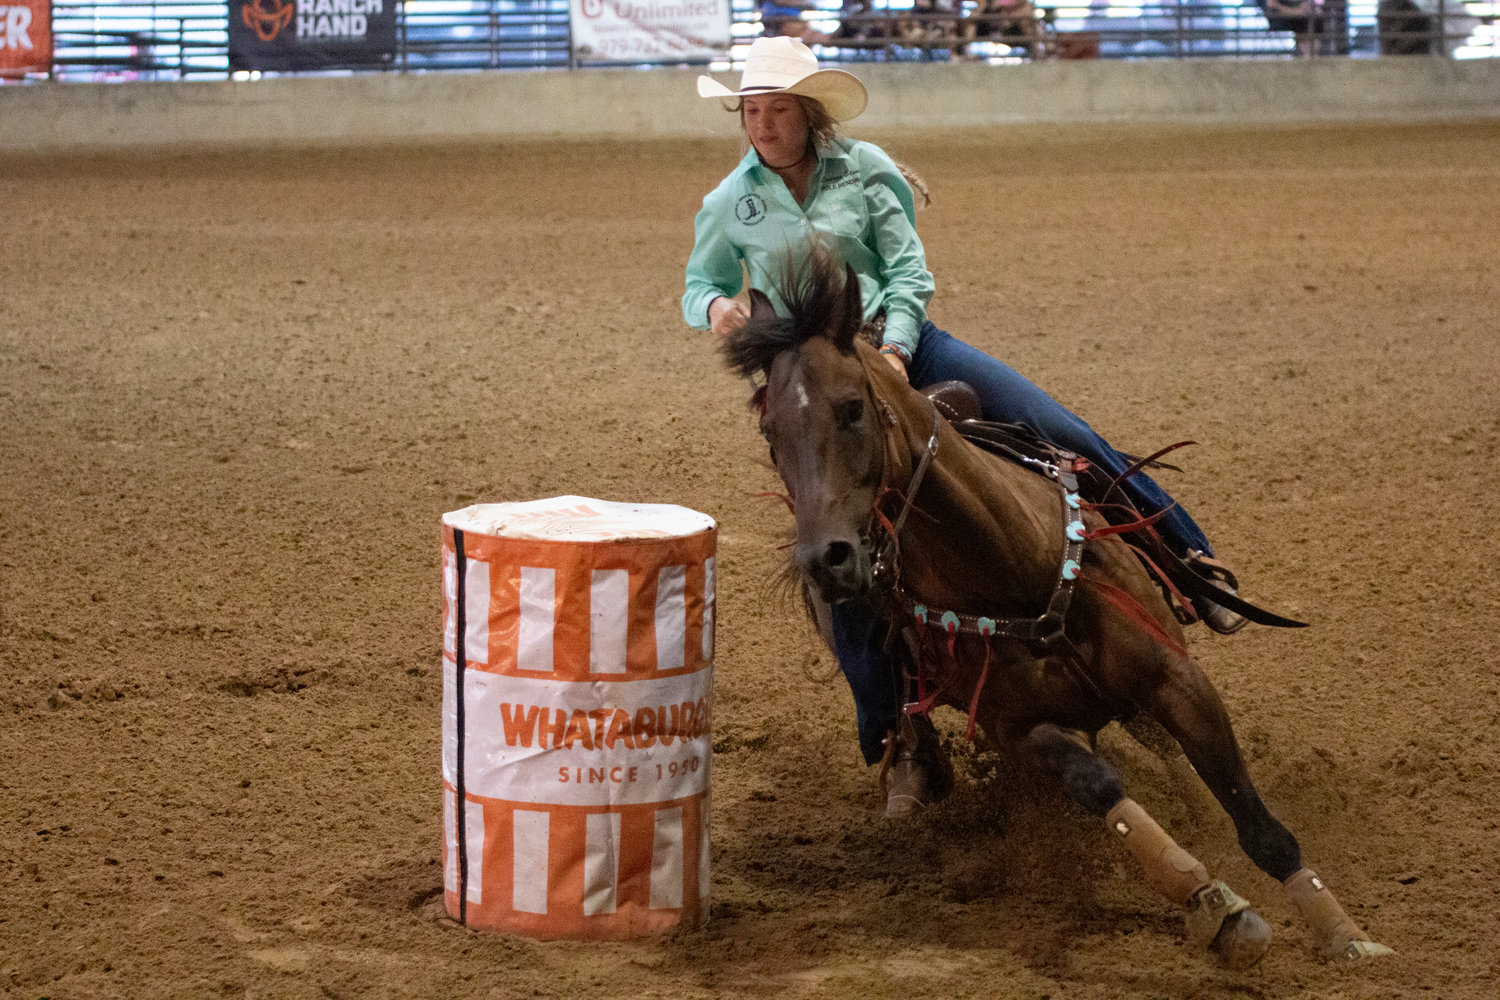 The Texas Youth Rodeo Association finals are at J.B. Wells Arena this week with young cowboys and cowgirls competing to finish out the summer on top. Pictured is Harwood’s Lauren Stone who is scheduled to perform in three different events.